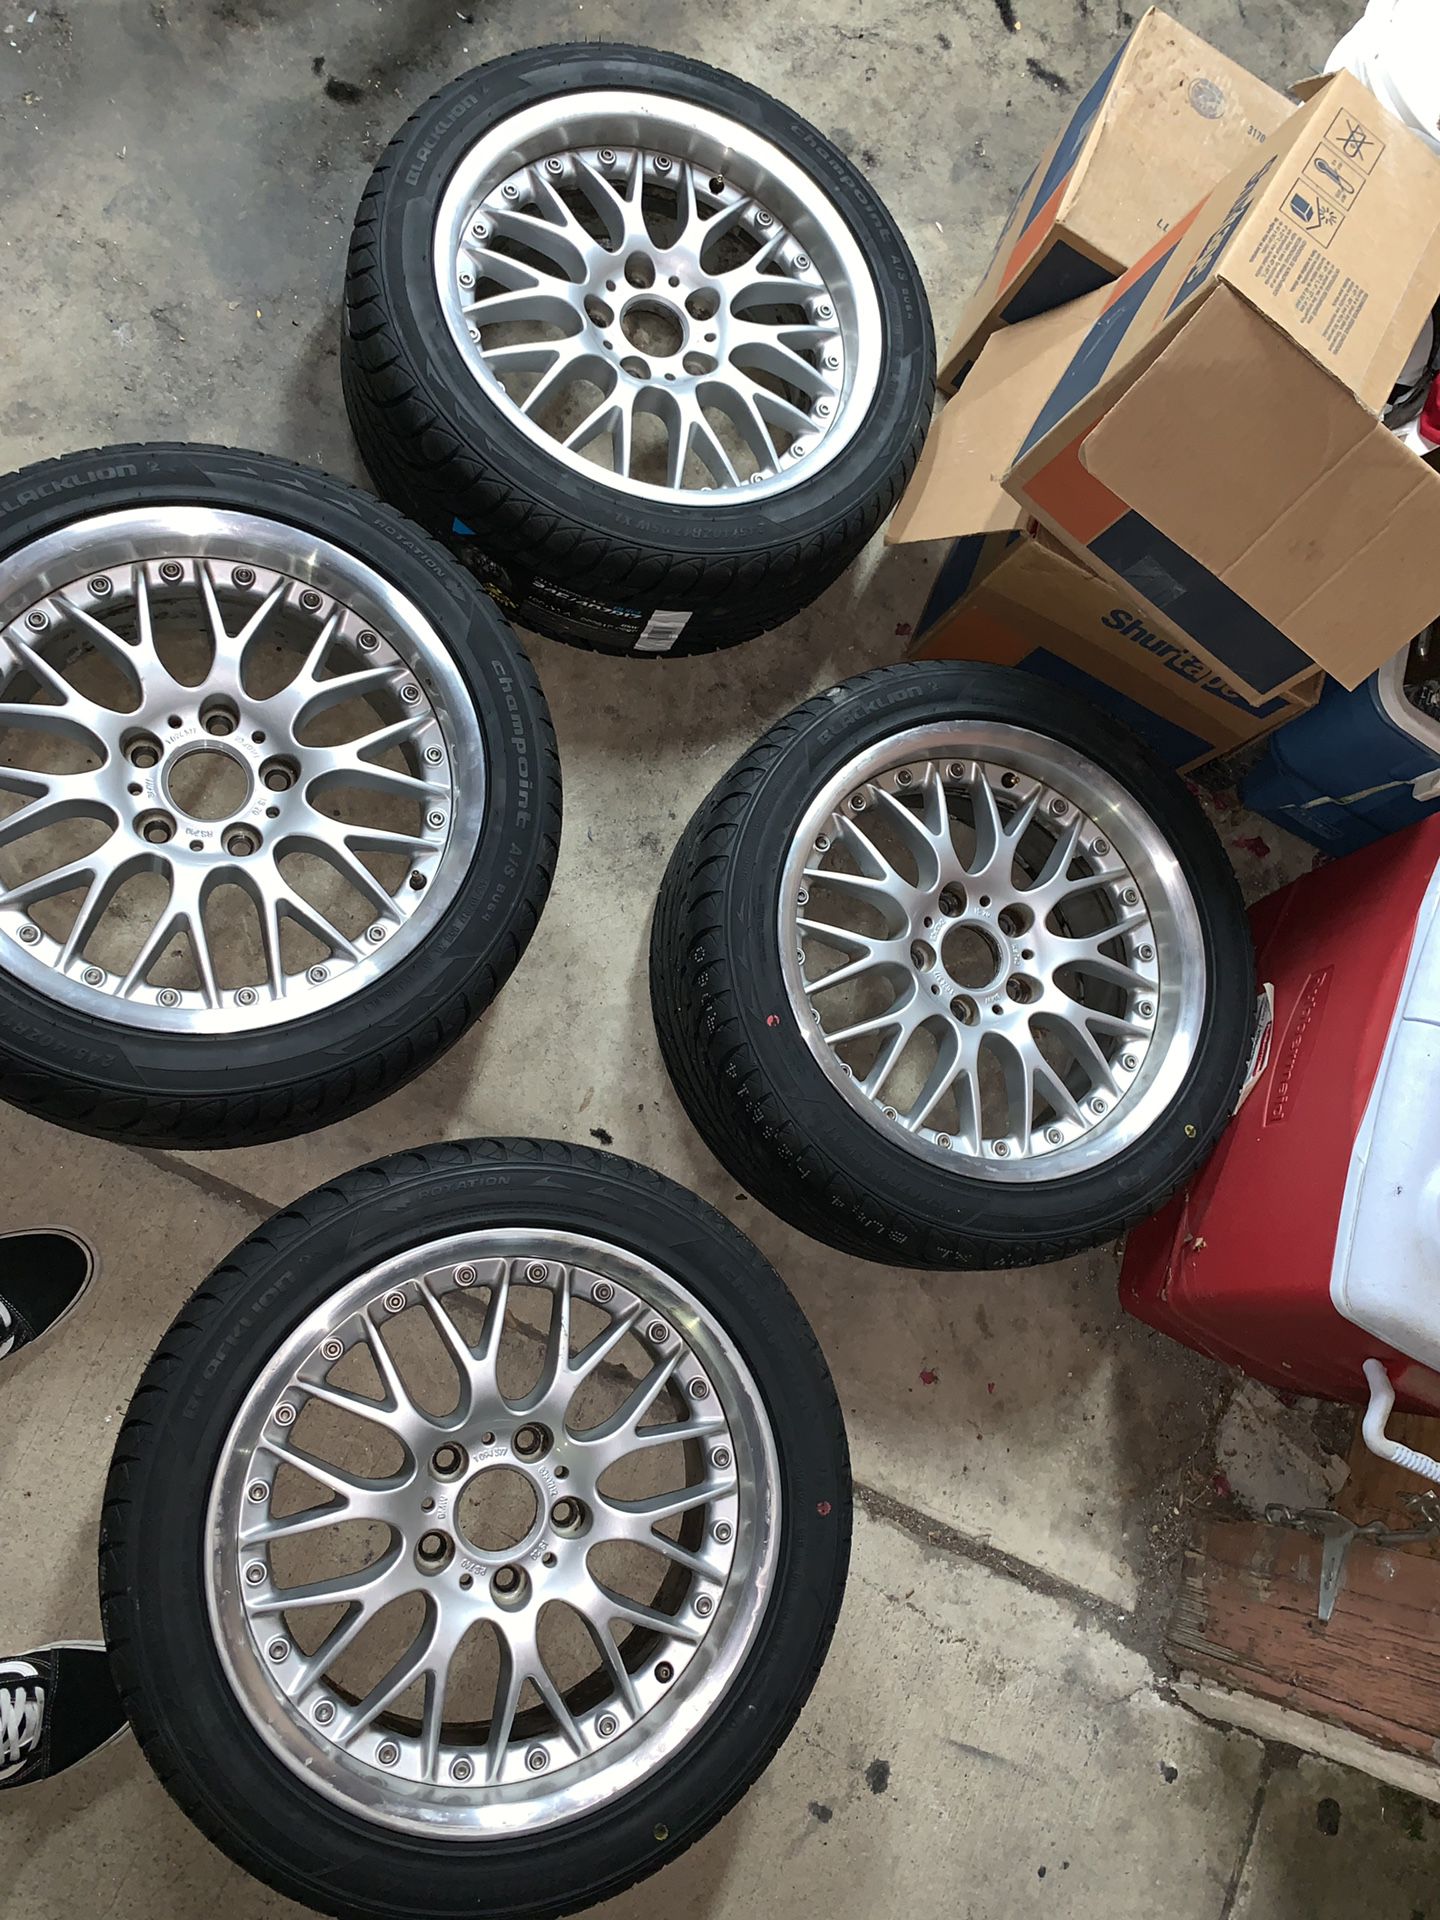 Bbs Bmw rims 17x8 Comes with new tires